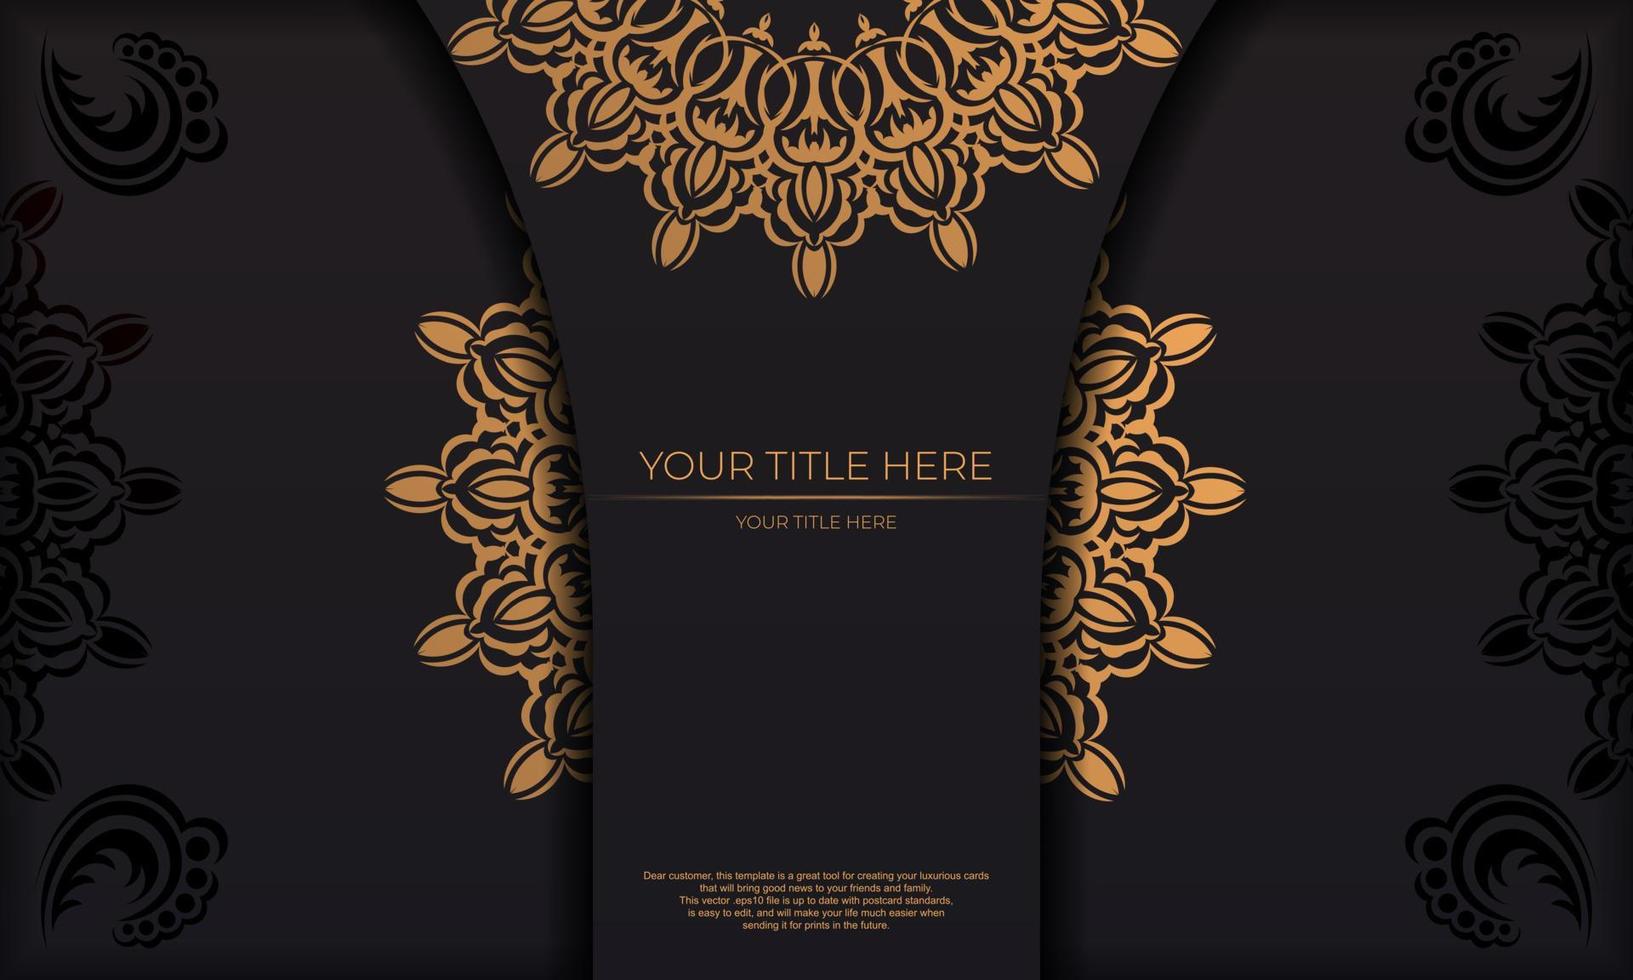 Luxury banner template with vintage ornaments and place for your design. Invitation card design with mandala patterns. vector